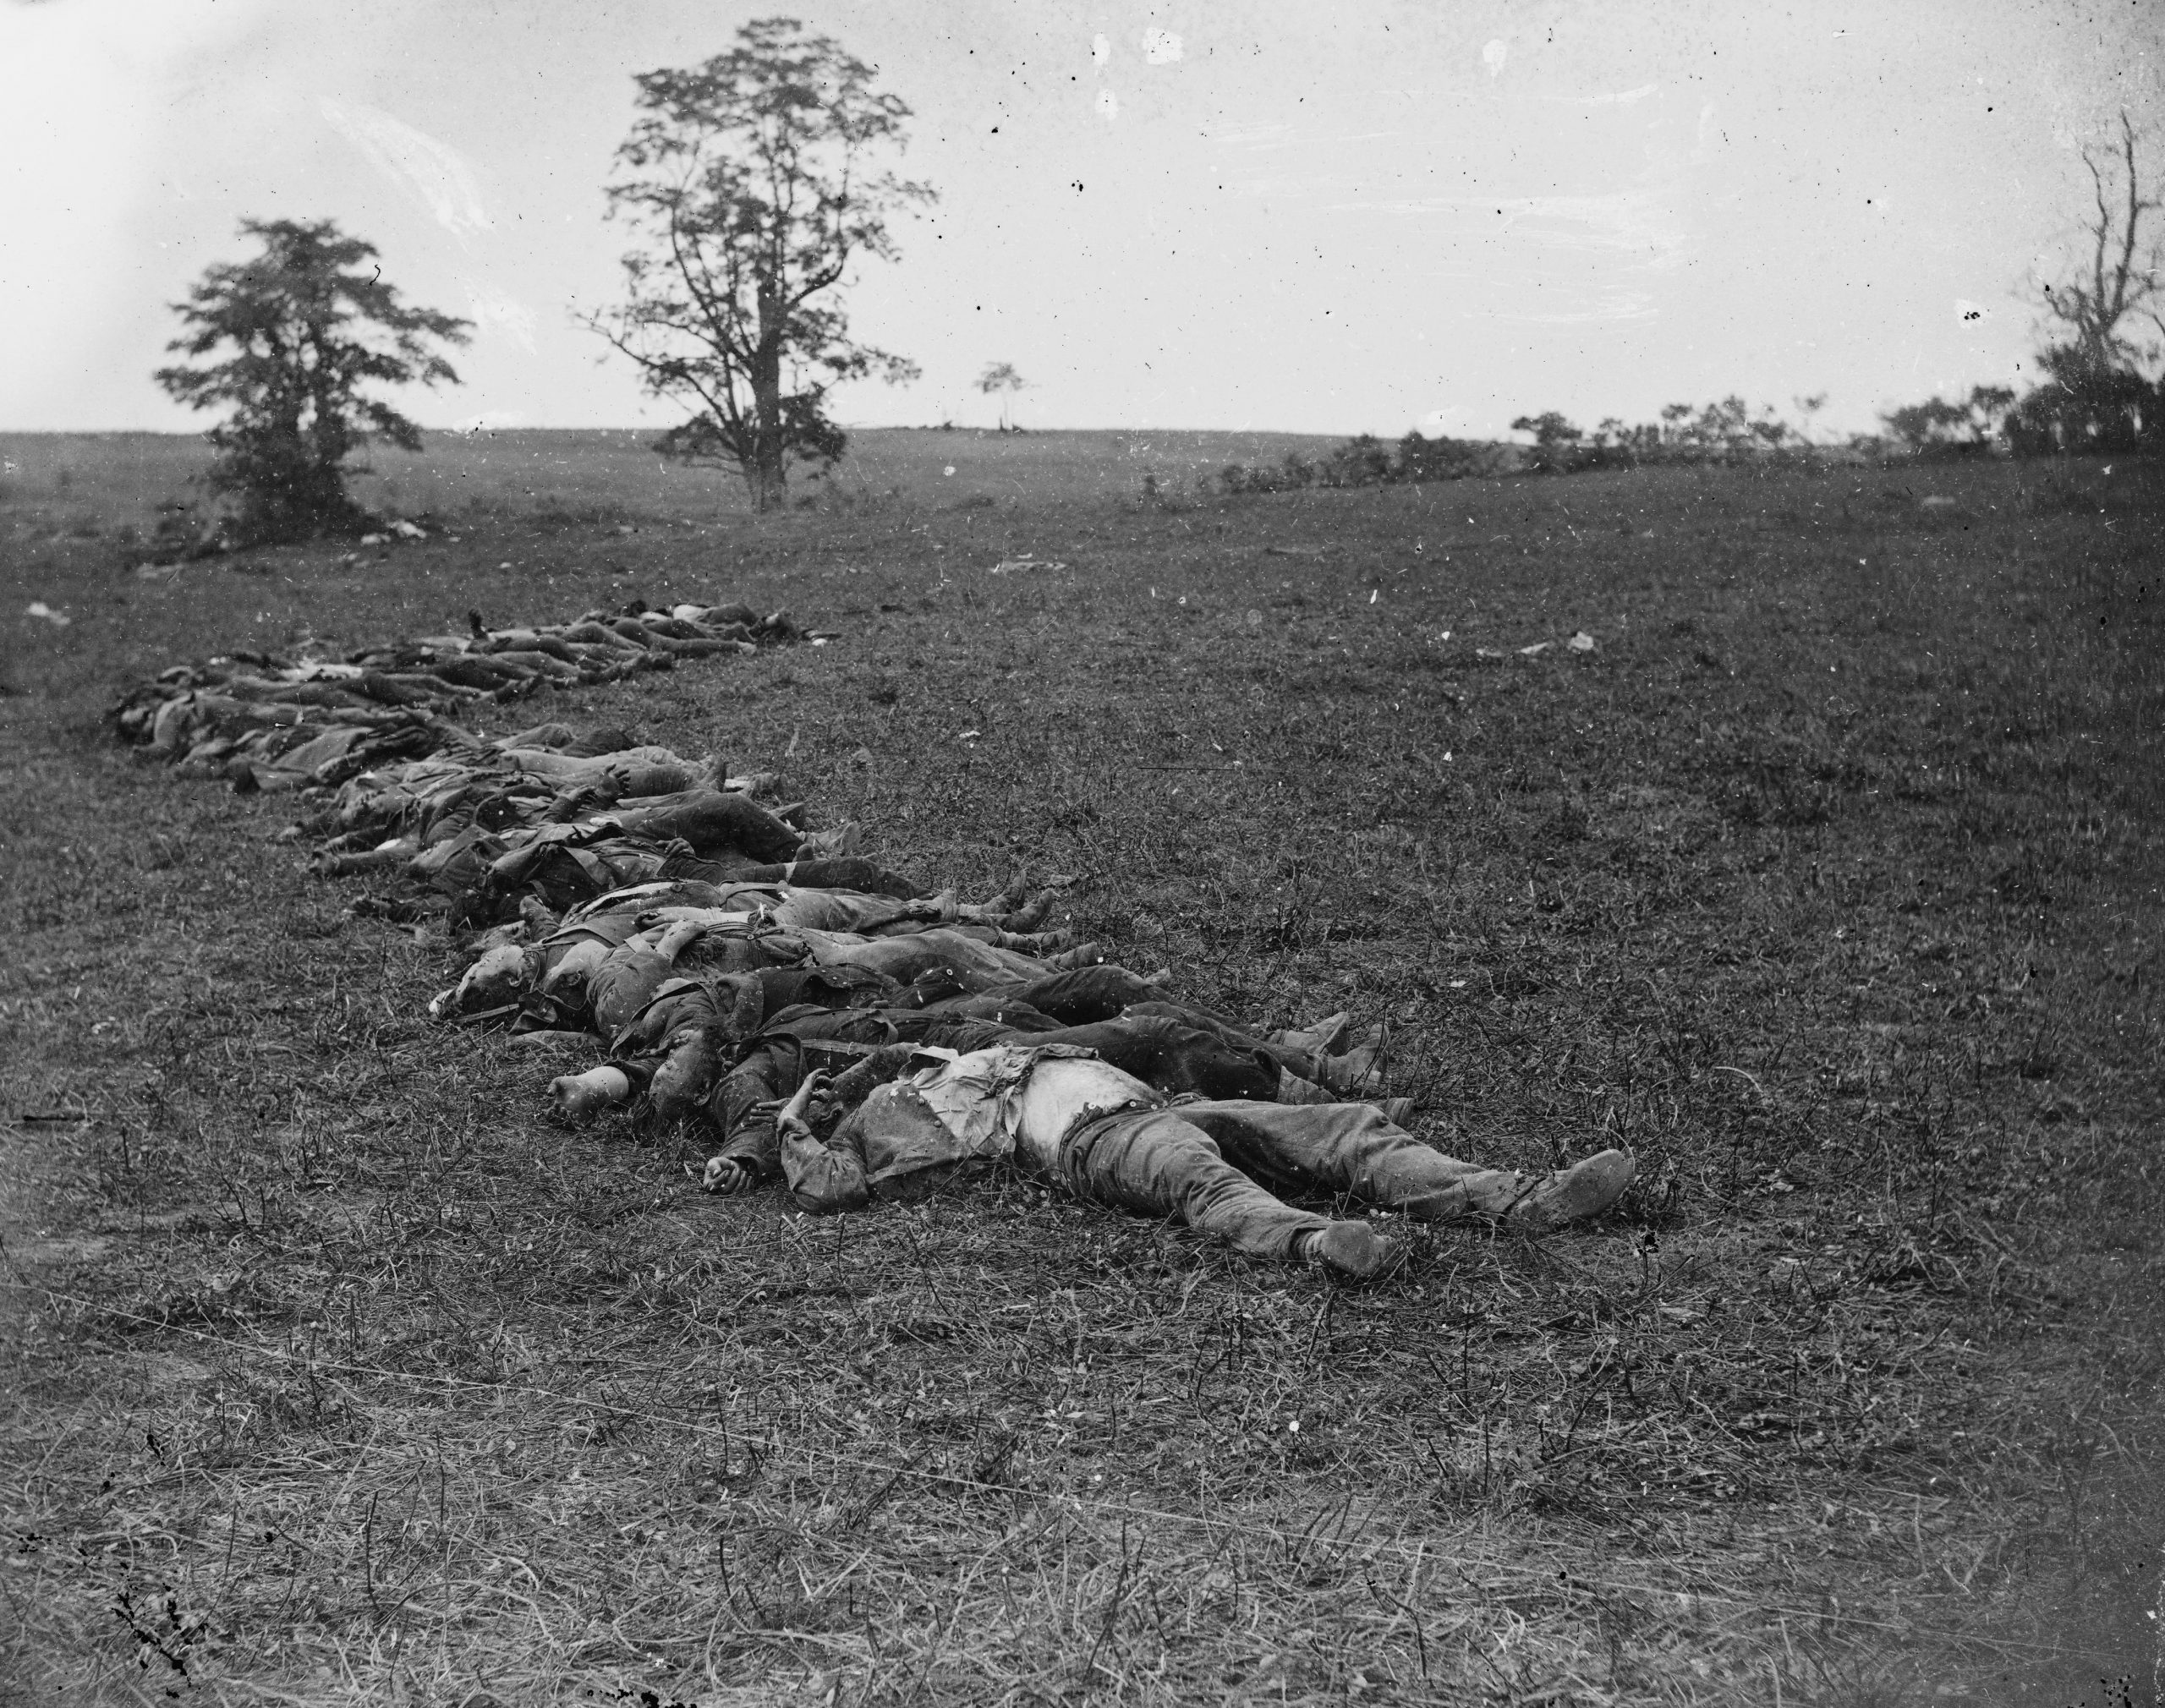 A black and white photograph of a field with dead bodies arranged in a line receding into the background. A few trees and bushes are in the background.